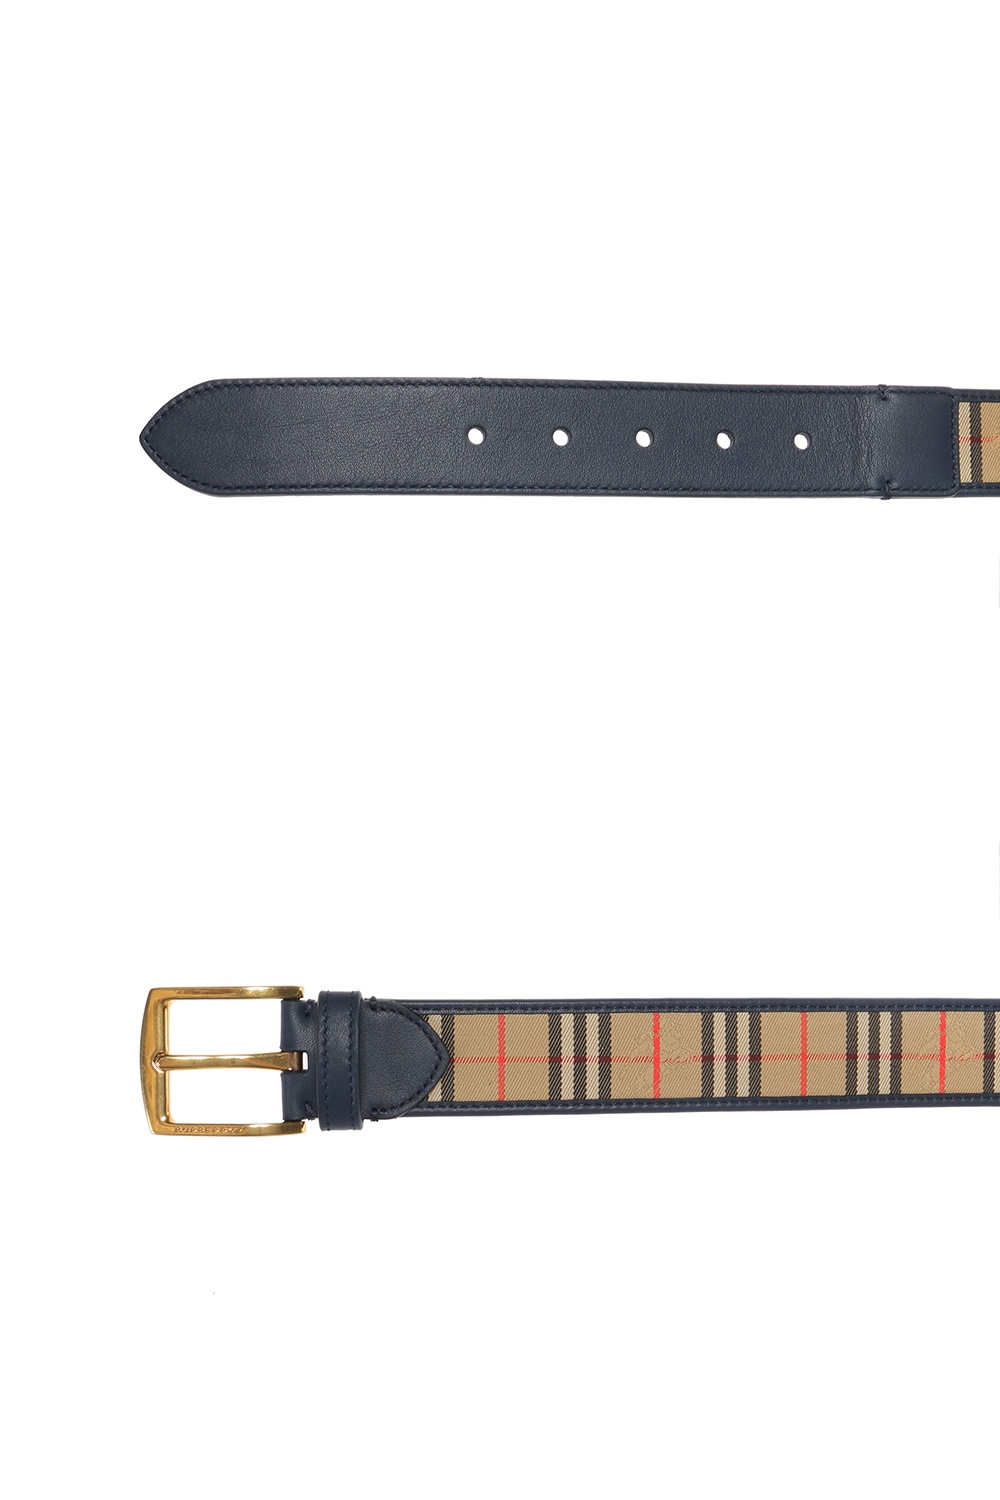 Burberry Belt with a plaid pattern, Men's Accessories